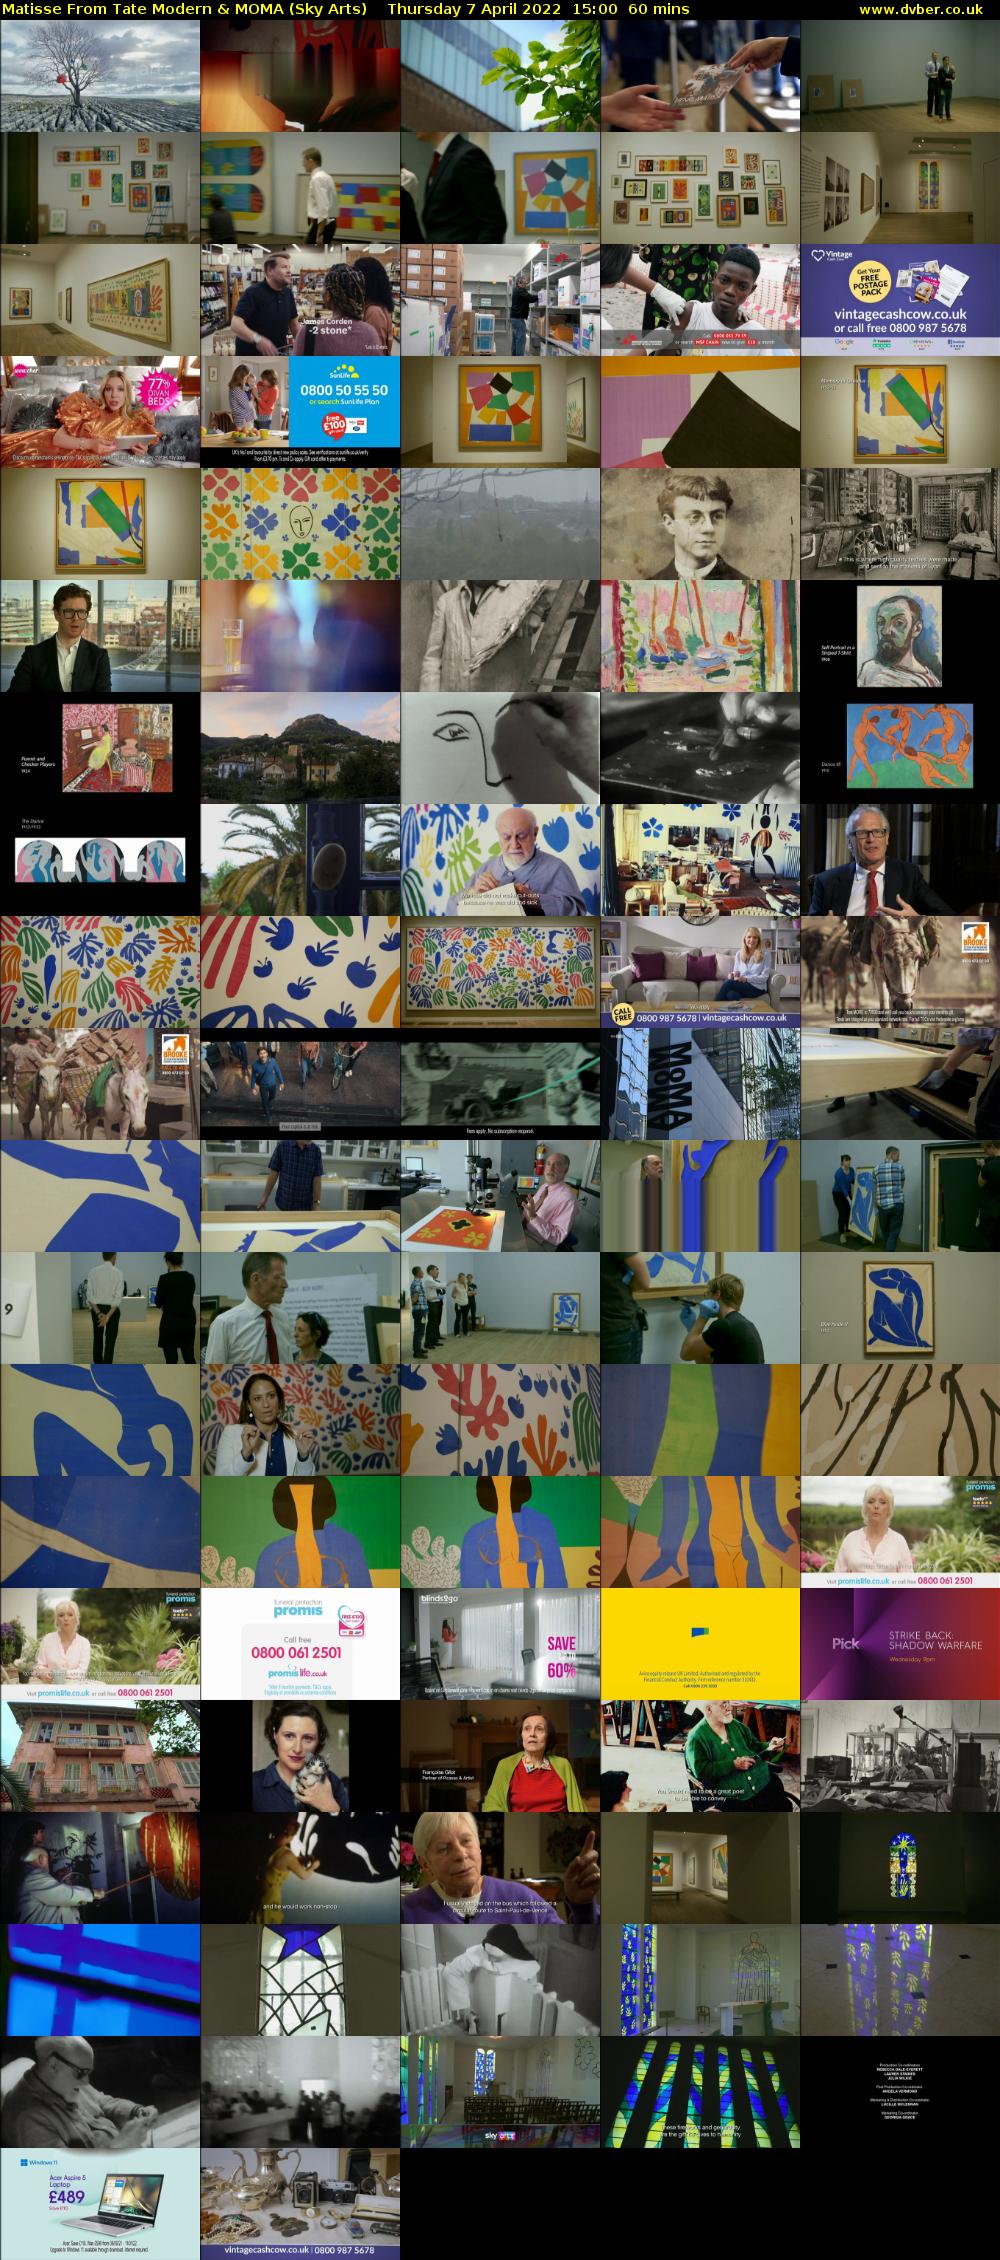 Matisse From Tate Modern & MoMa (Sky Arts) Thursday 7 April 2022 15:00 - 16:00